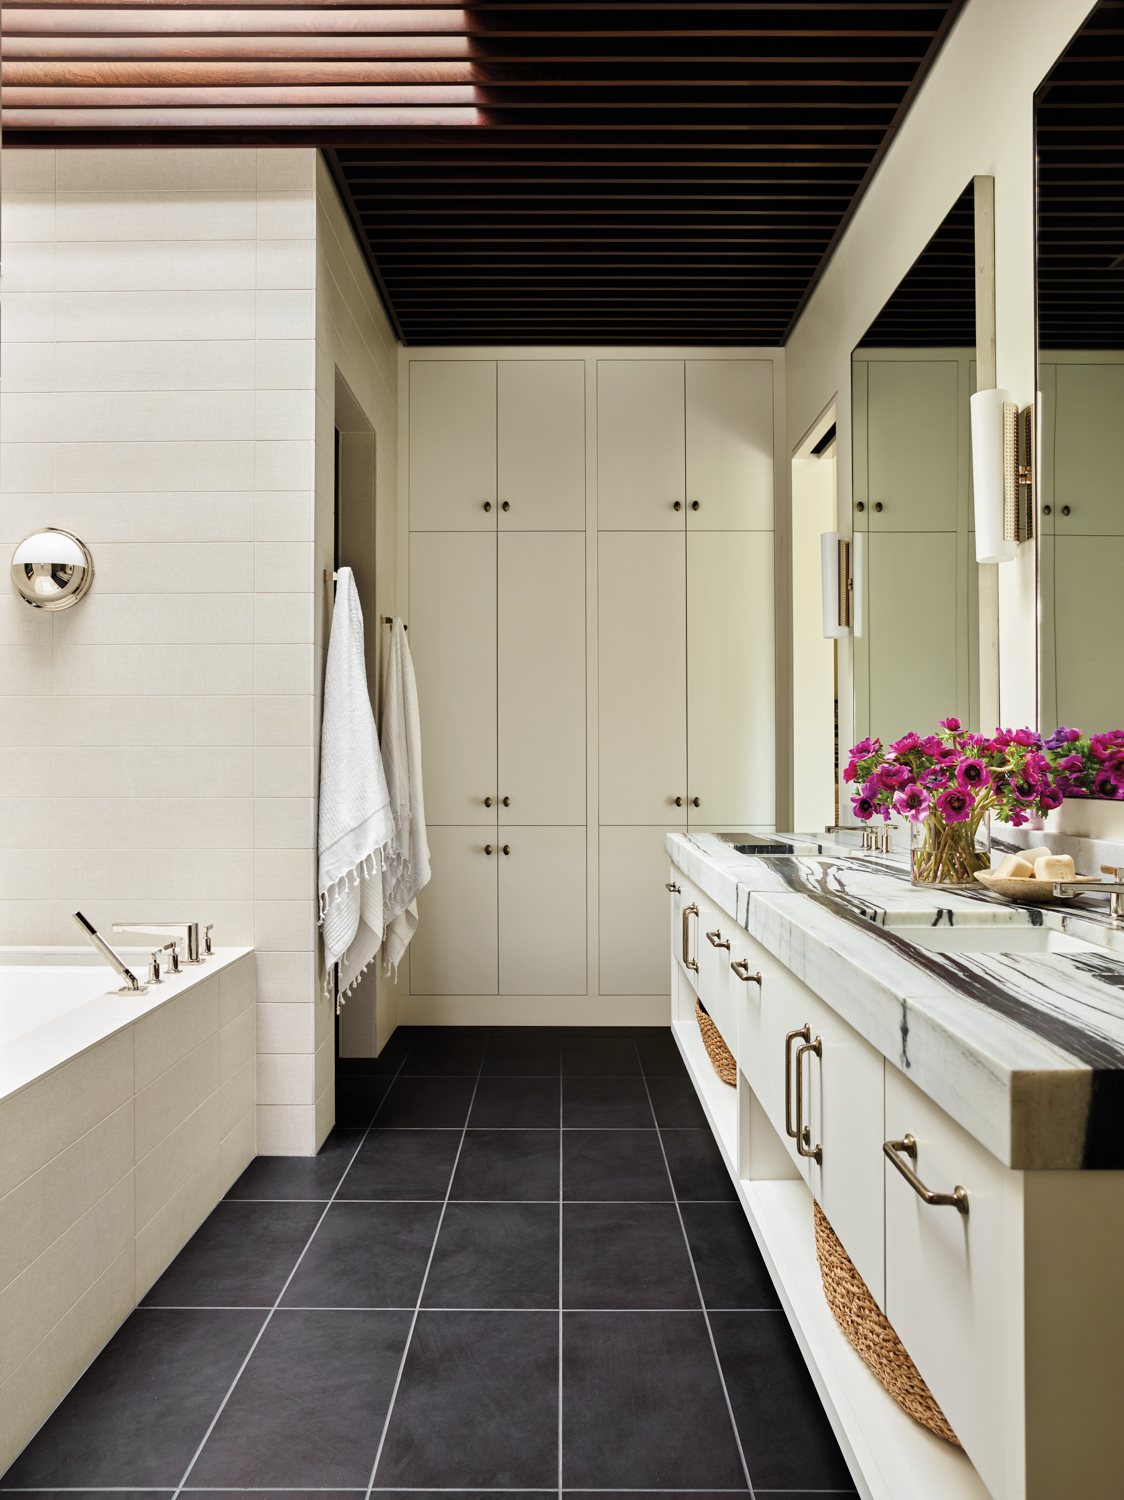 Bathroom with cream-colored built-in cabinetry...